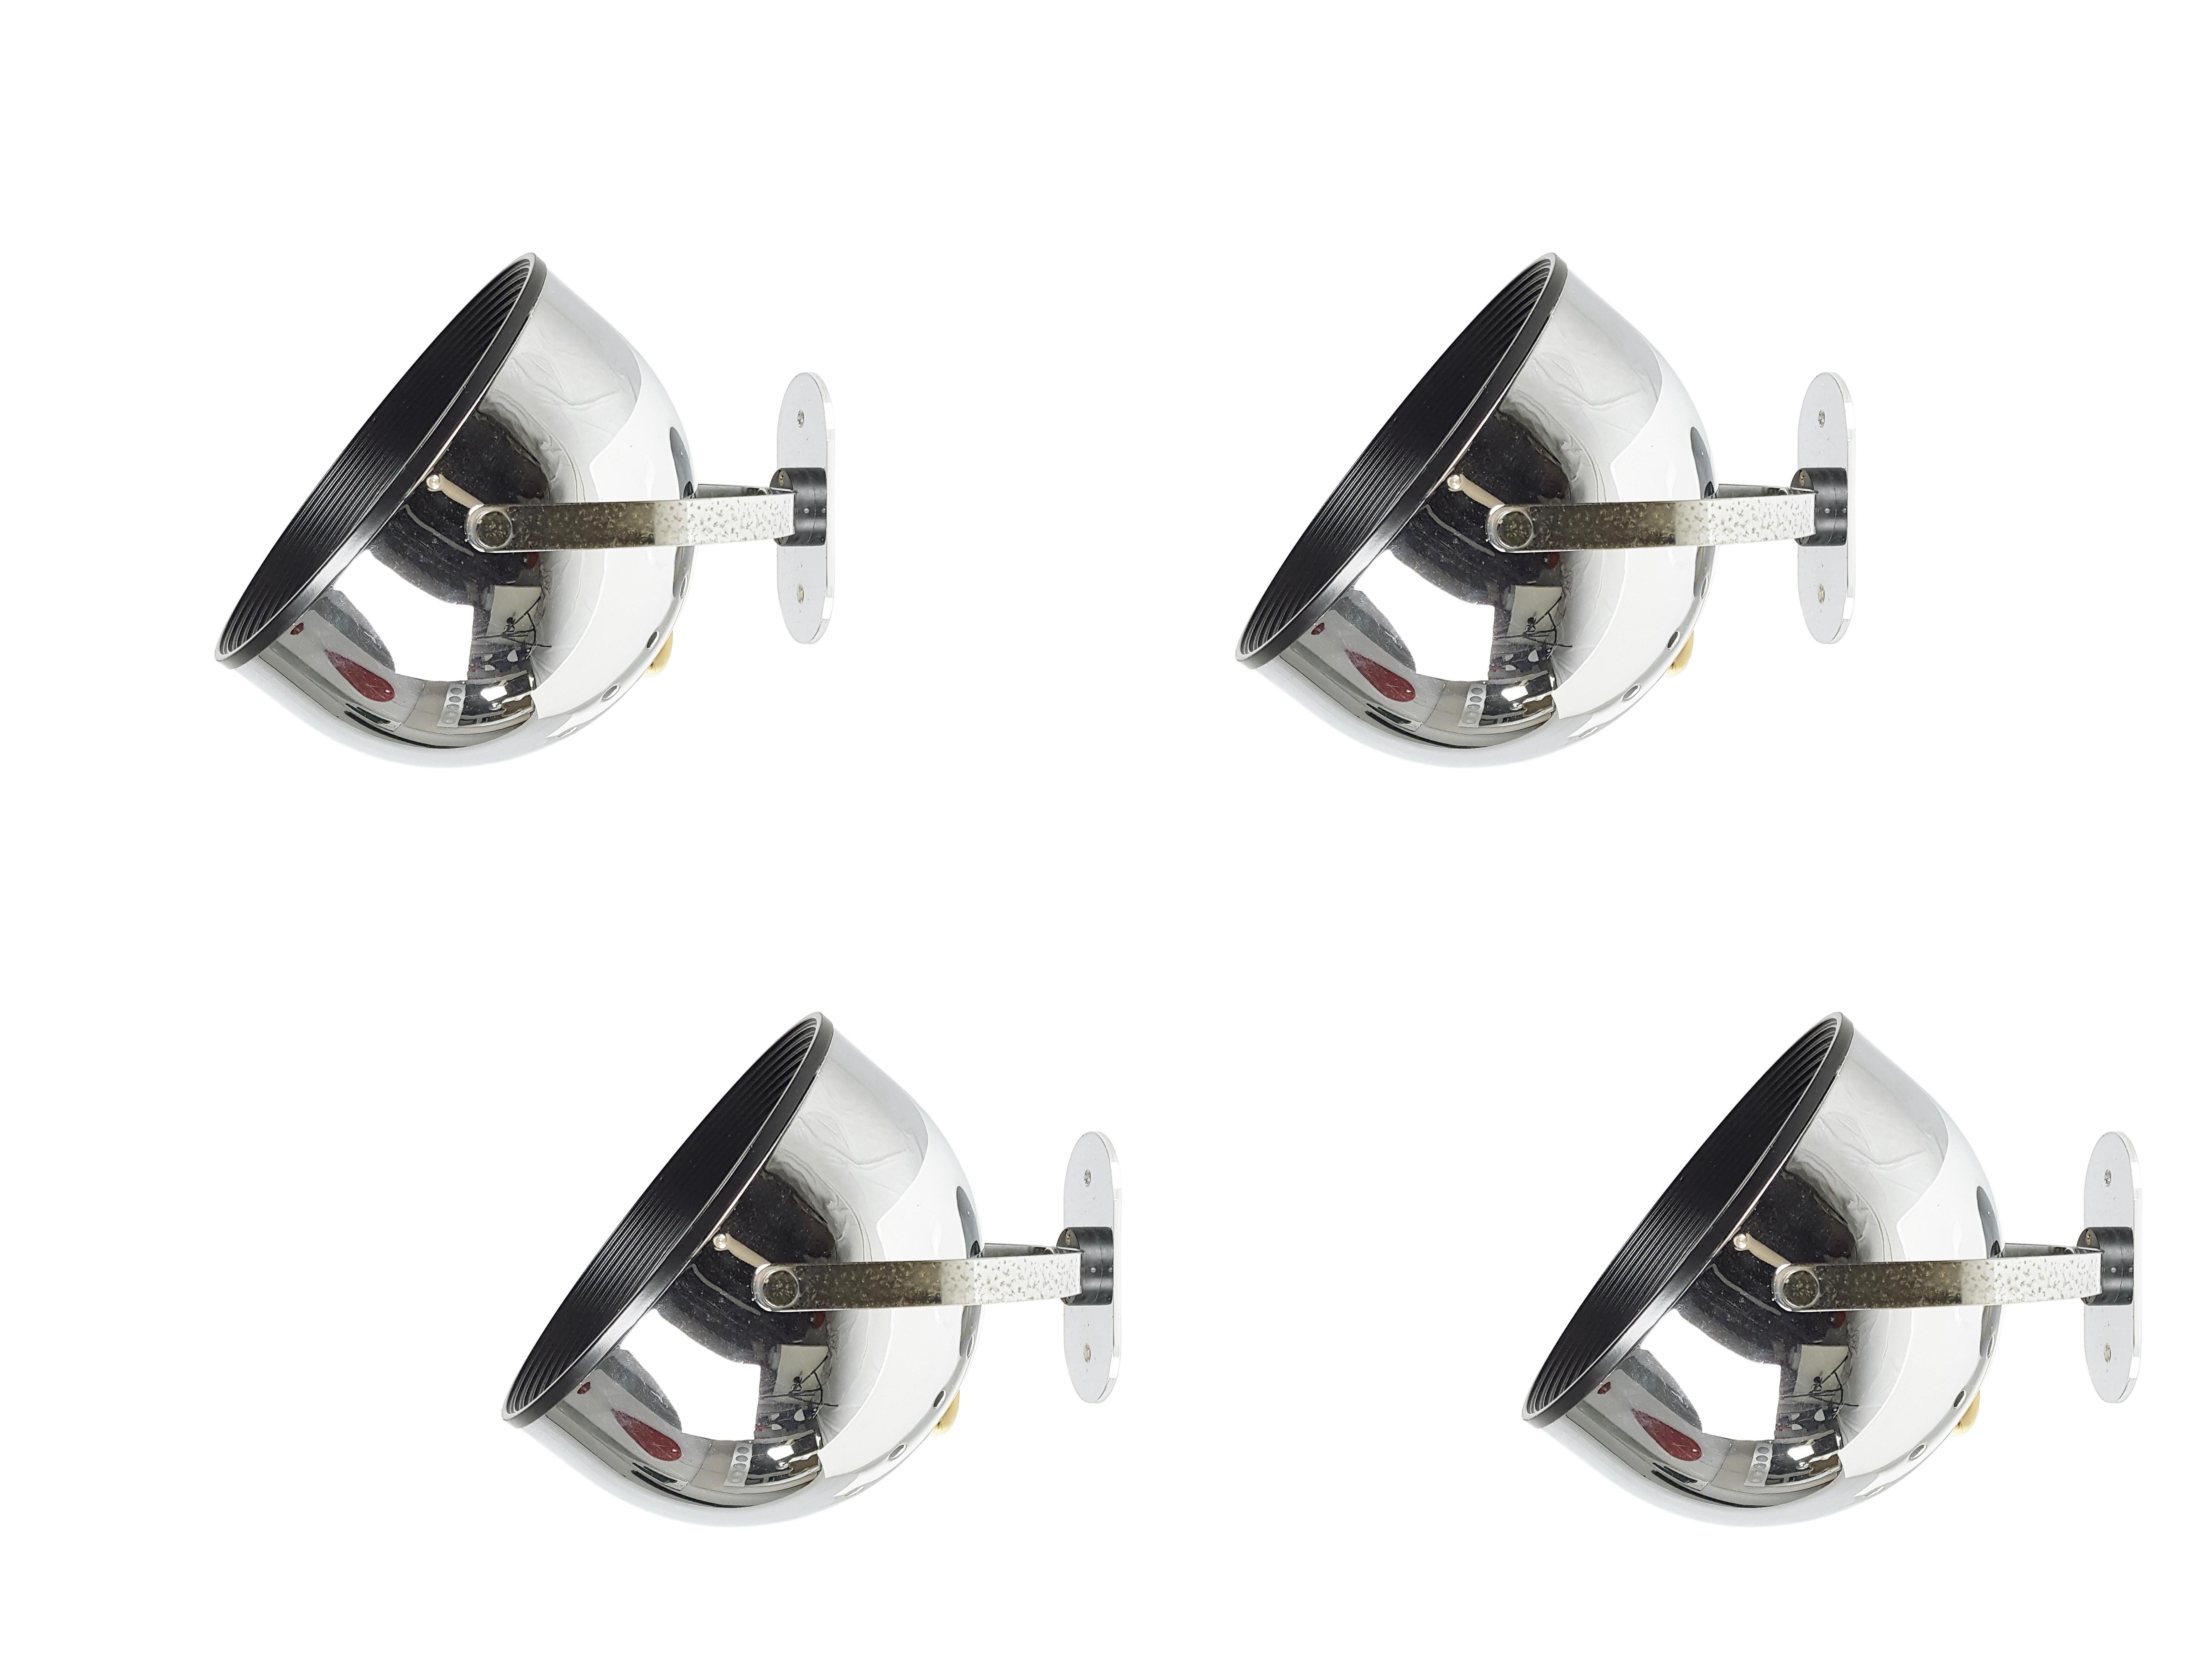 Chrome-Plated & Painted Metal 1960s-1970s Wall Lamps by Gae Aulenti for Stilnovo 5